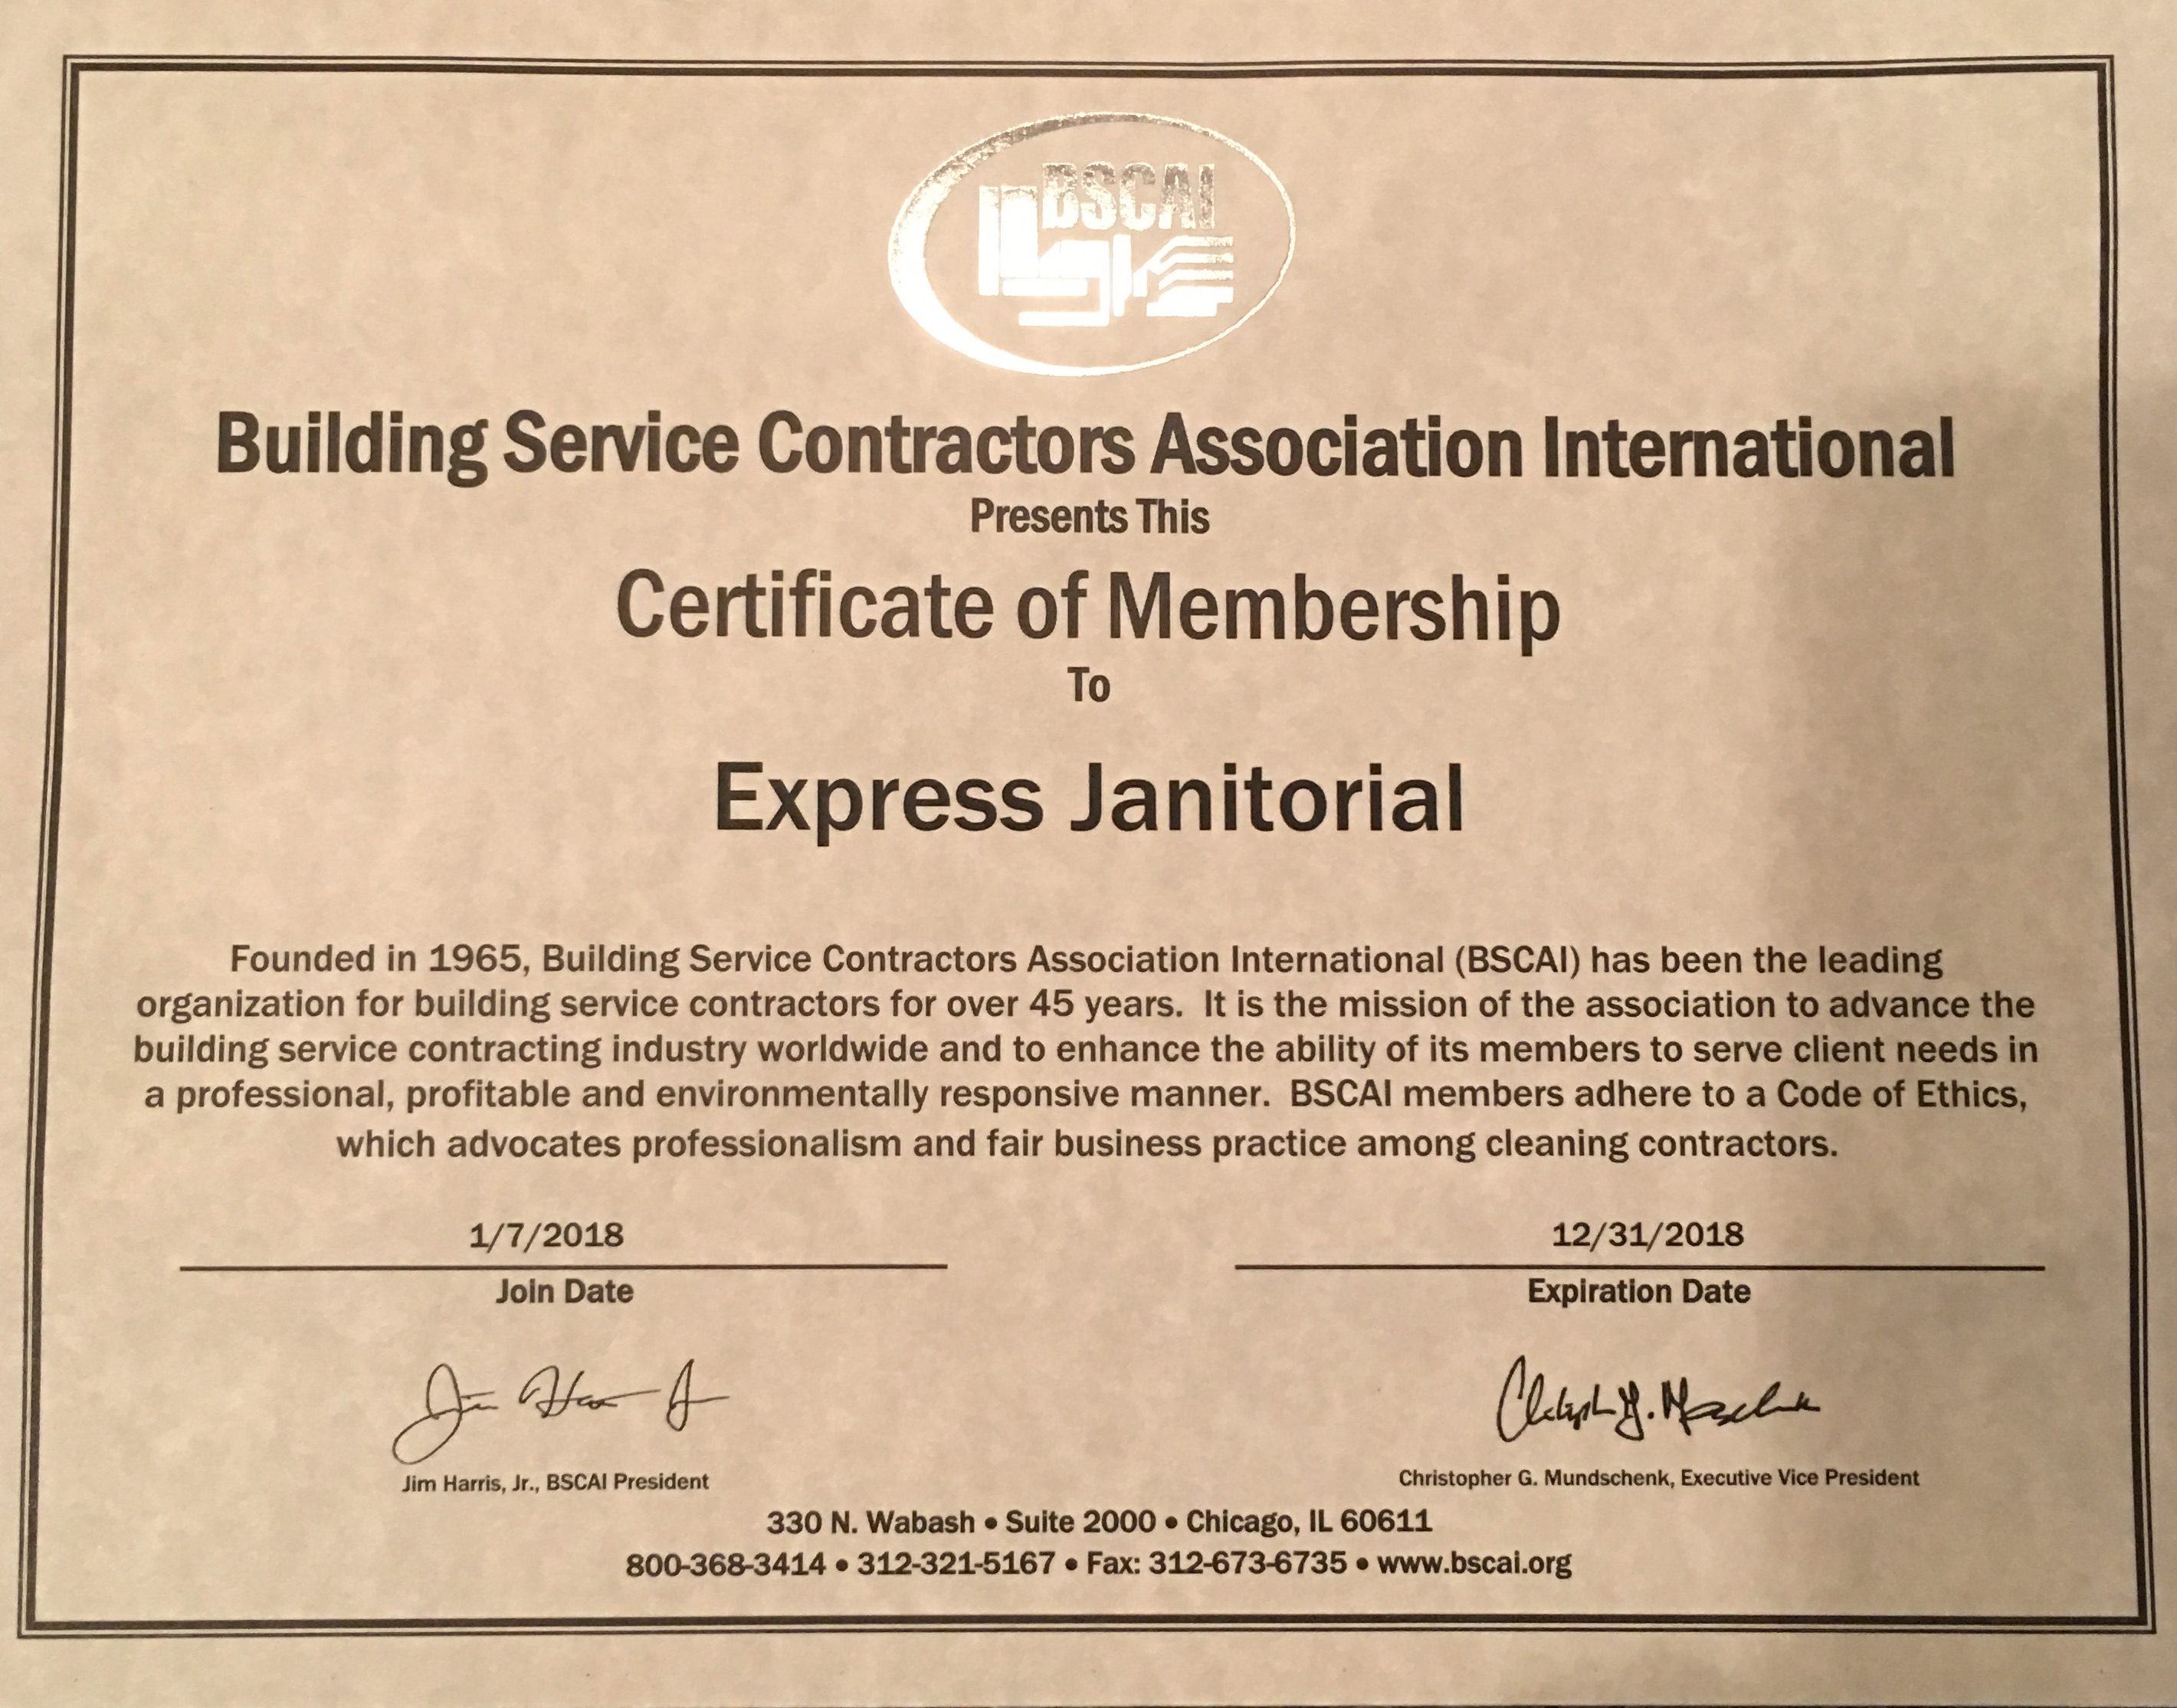 Building Service Contractors Association International and Express Janitorial